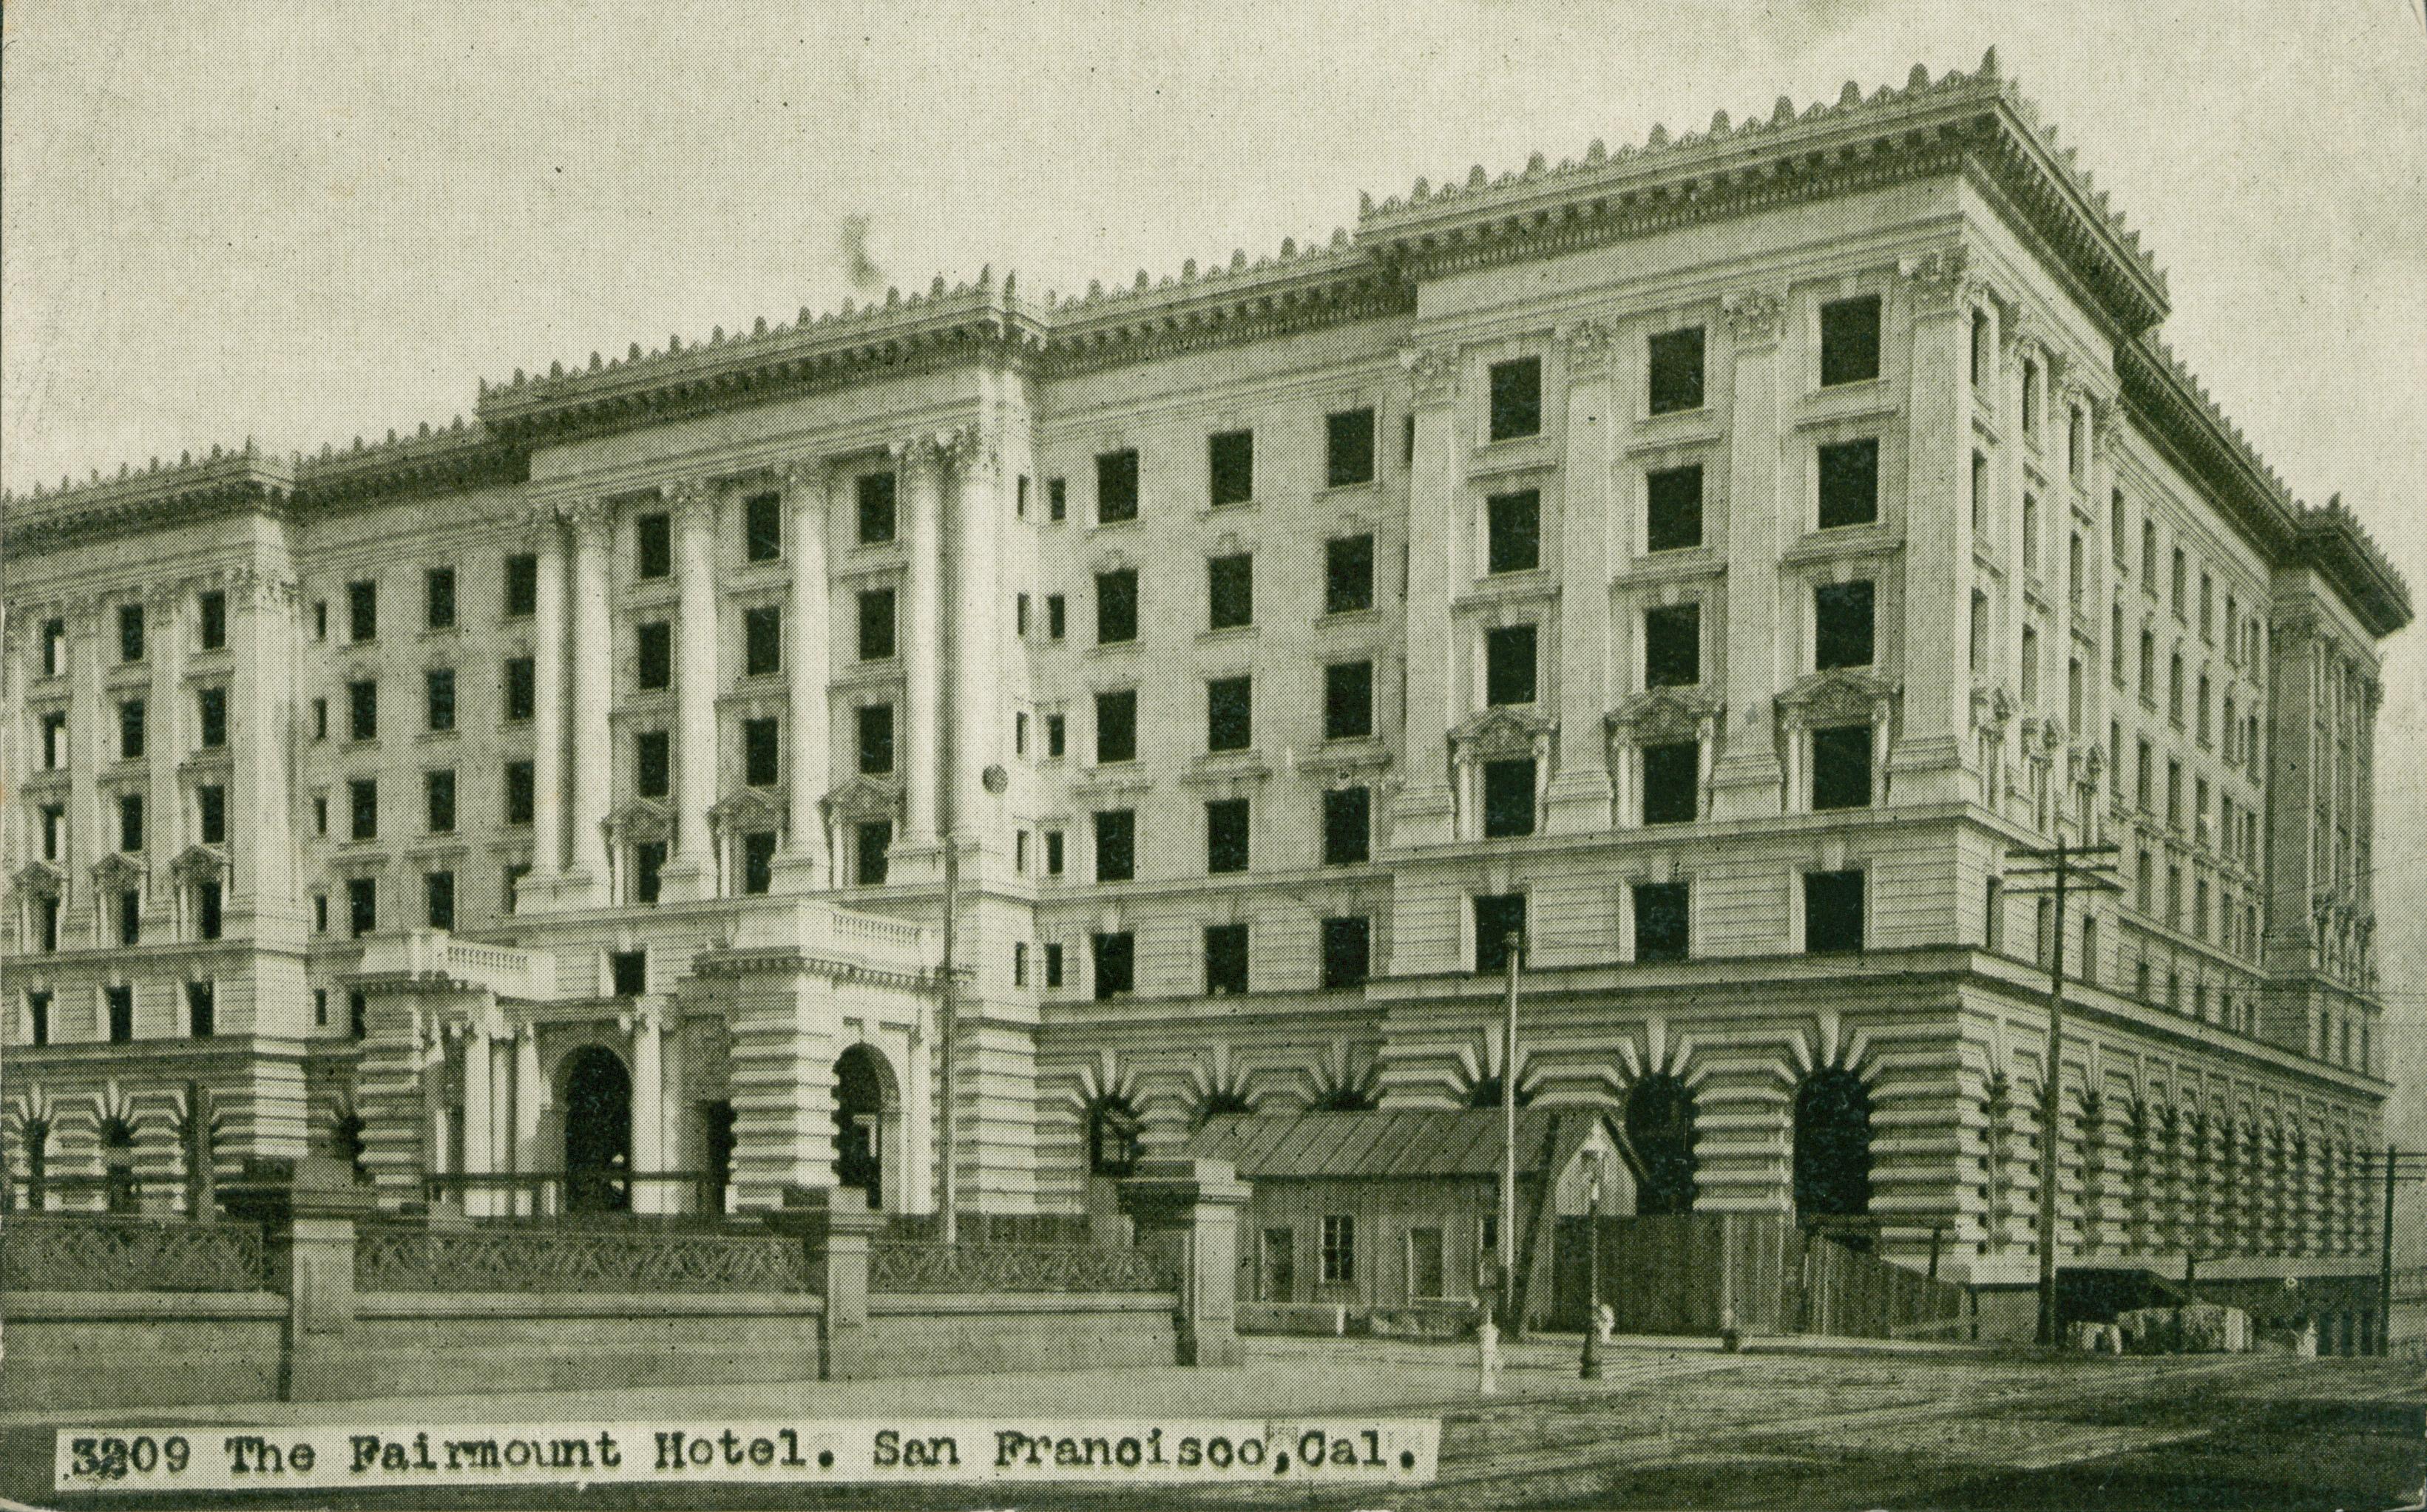 Shows the Fairmont Hotel prior the earthquake